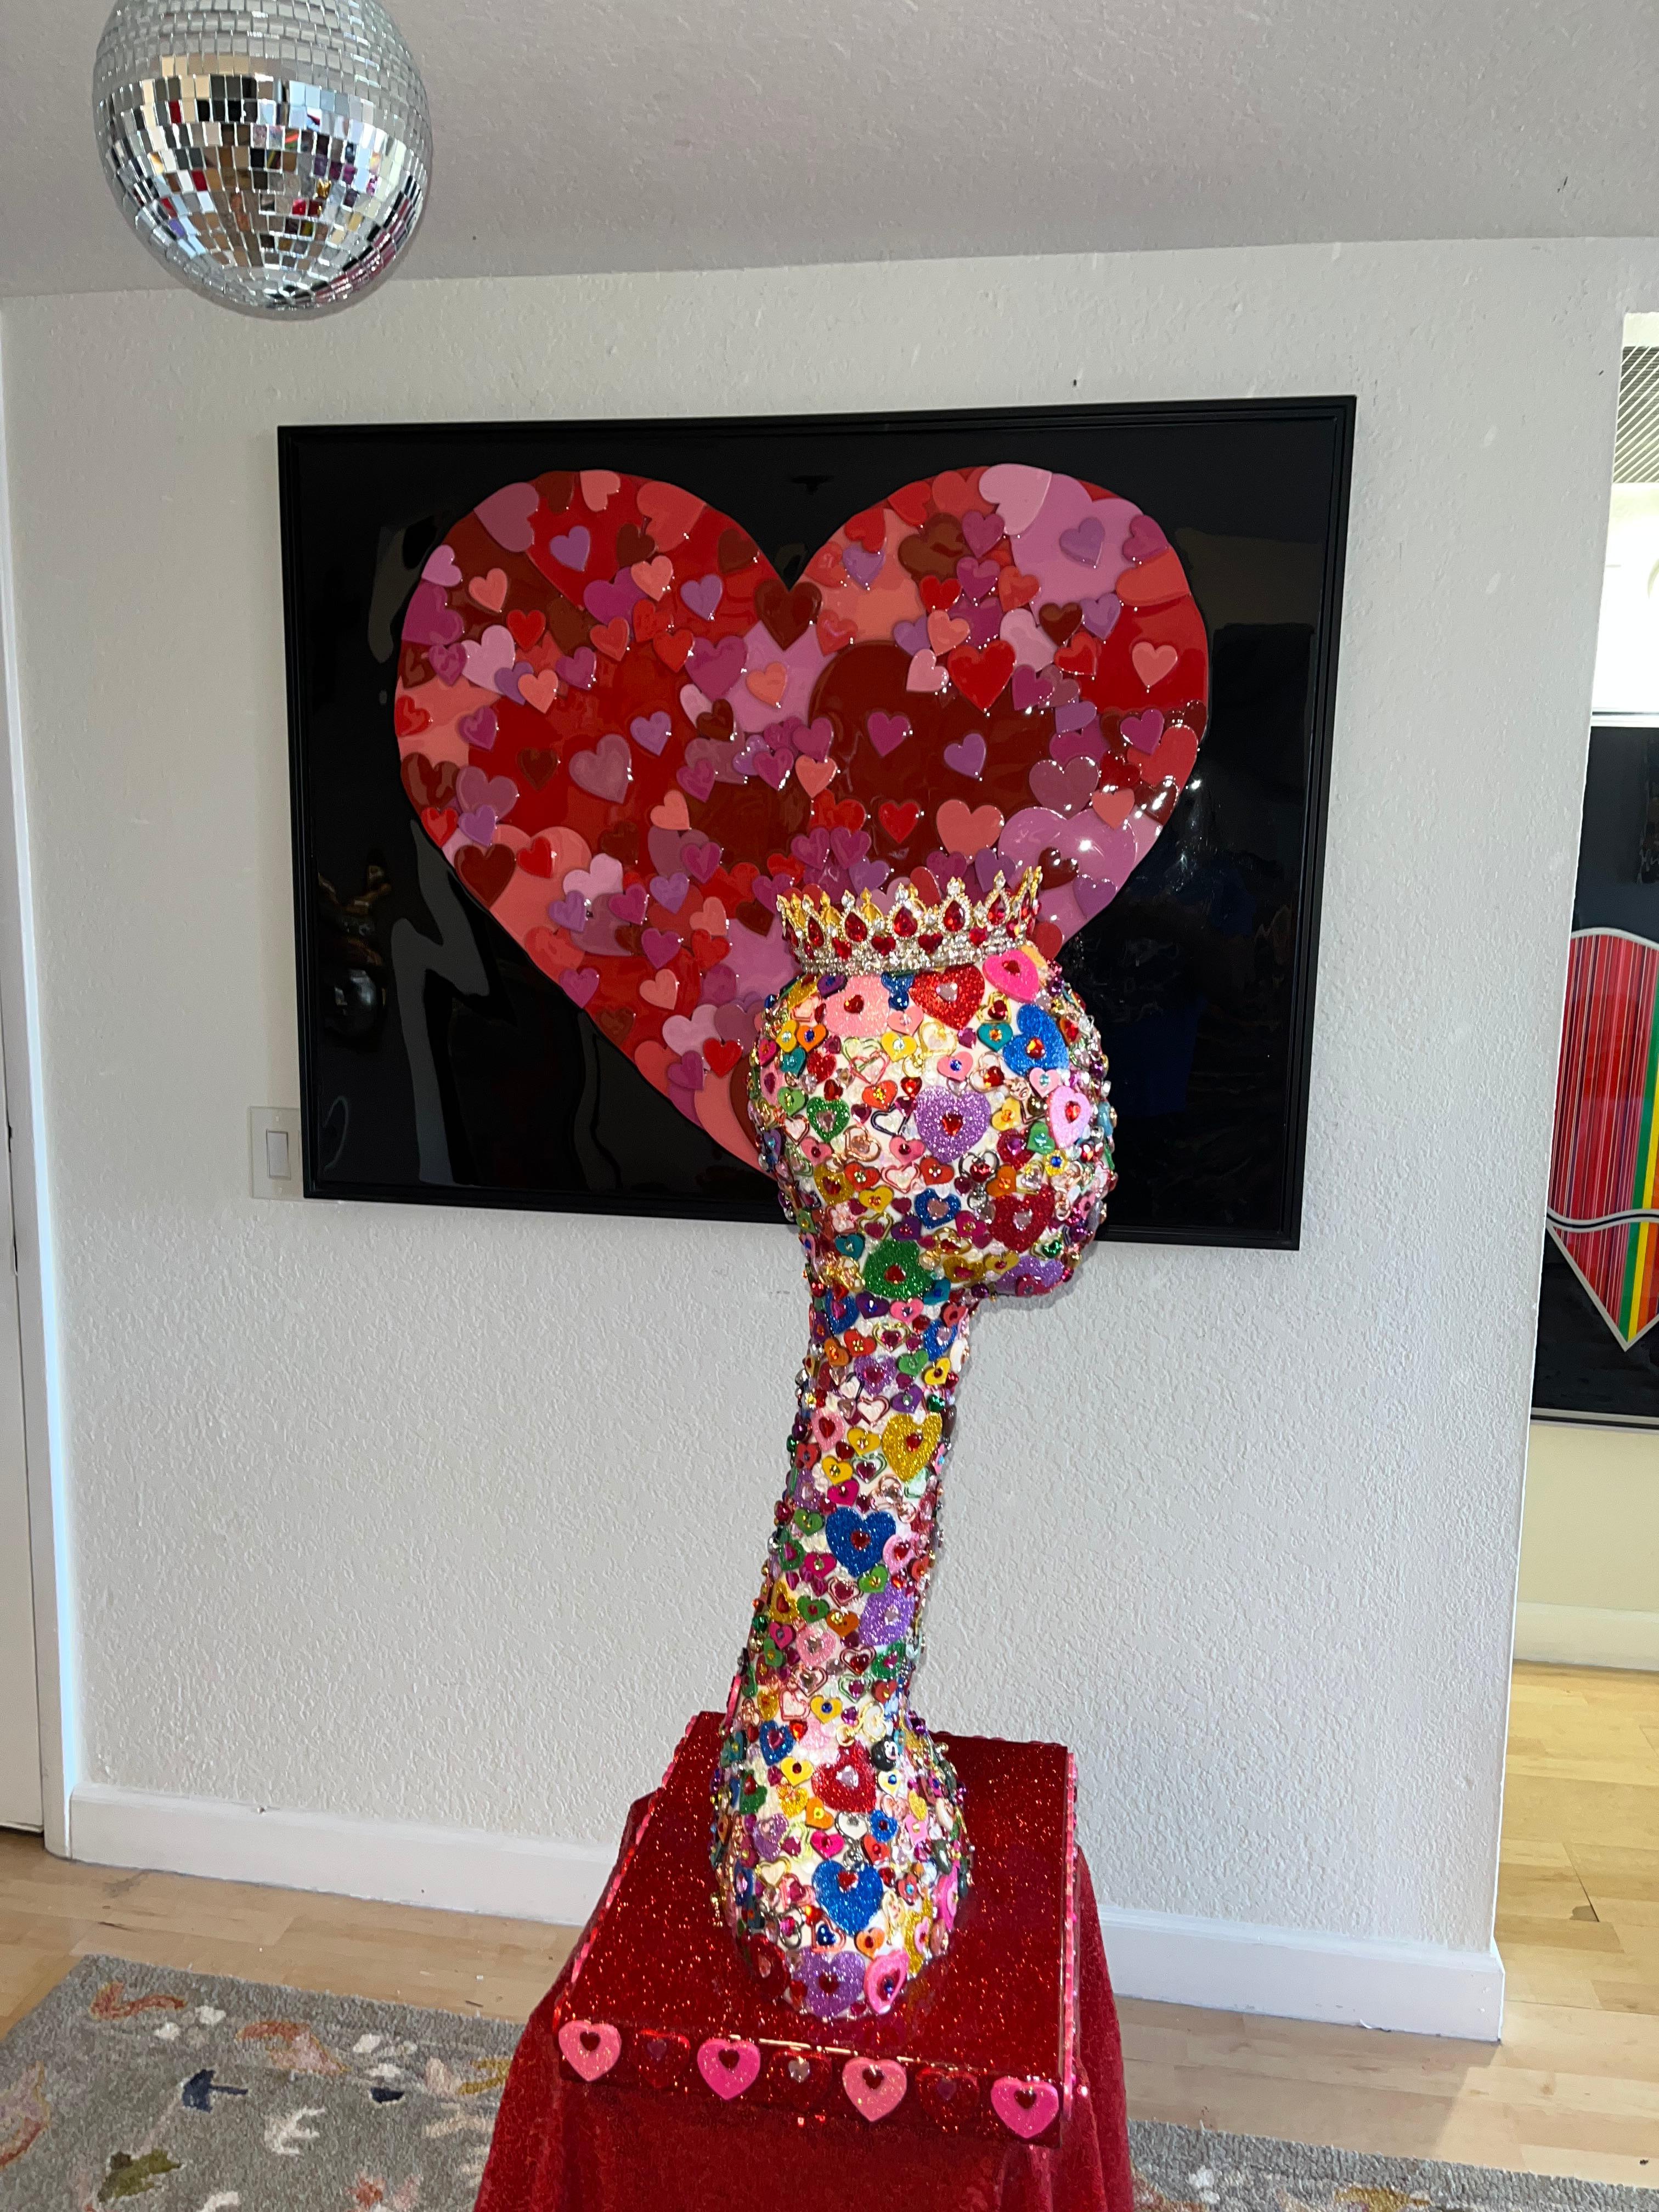 QUEEN OF HEARTS (Original and One of A Kind Mixed Media Sculpture) 6